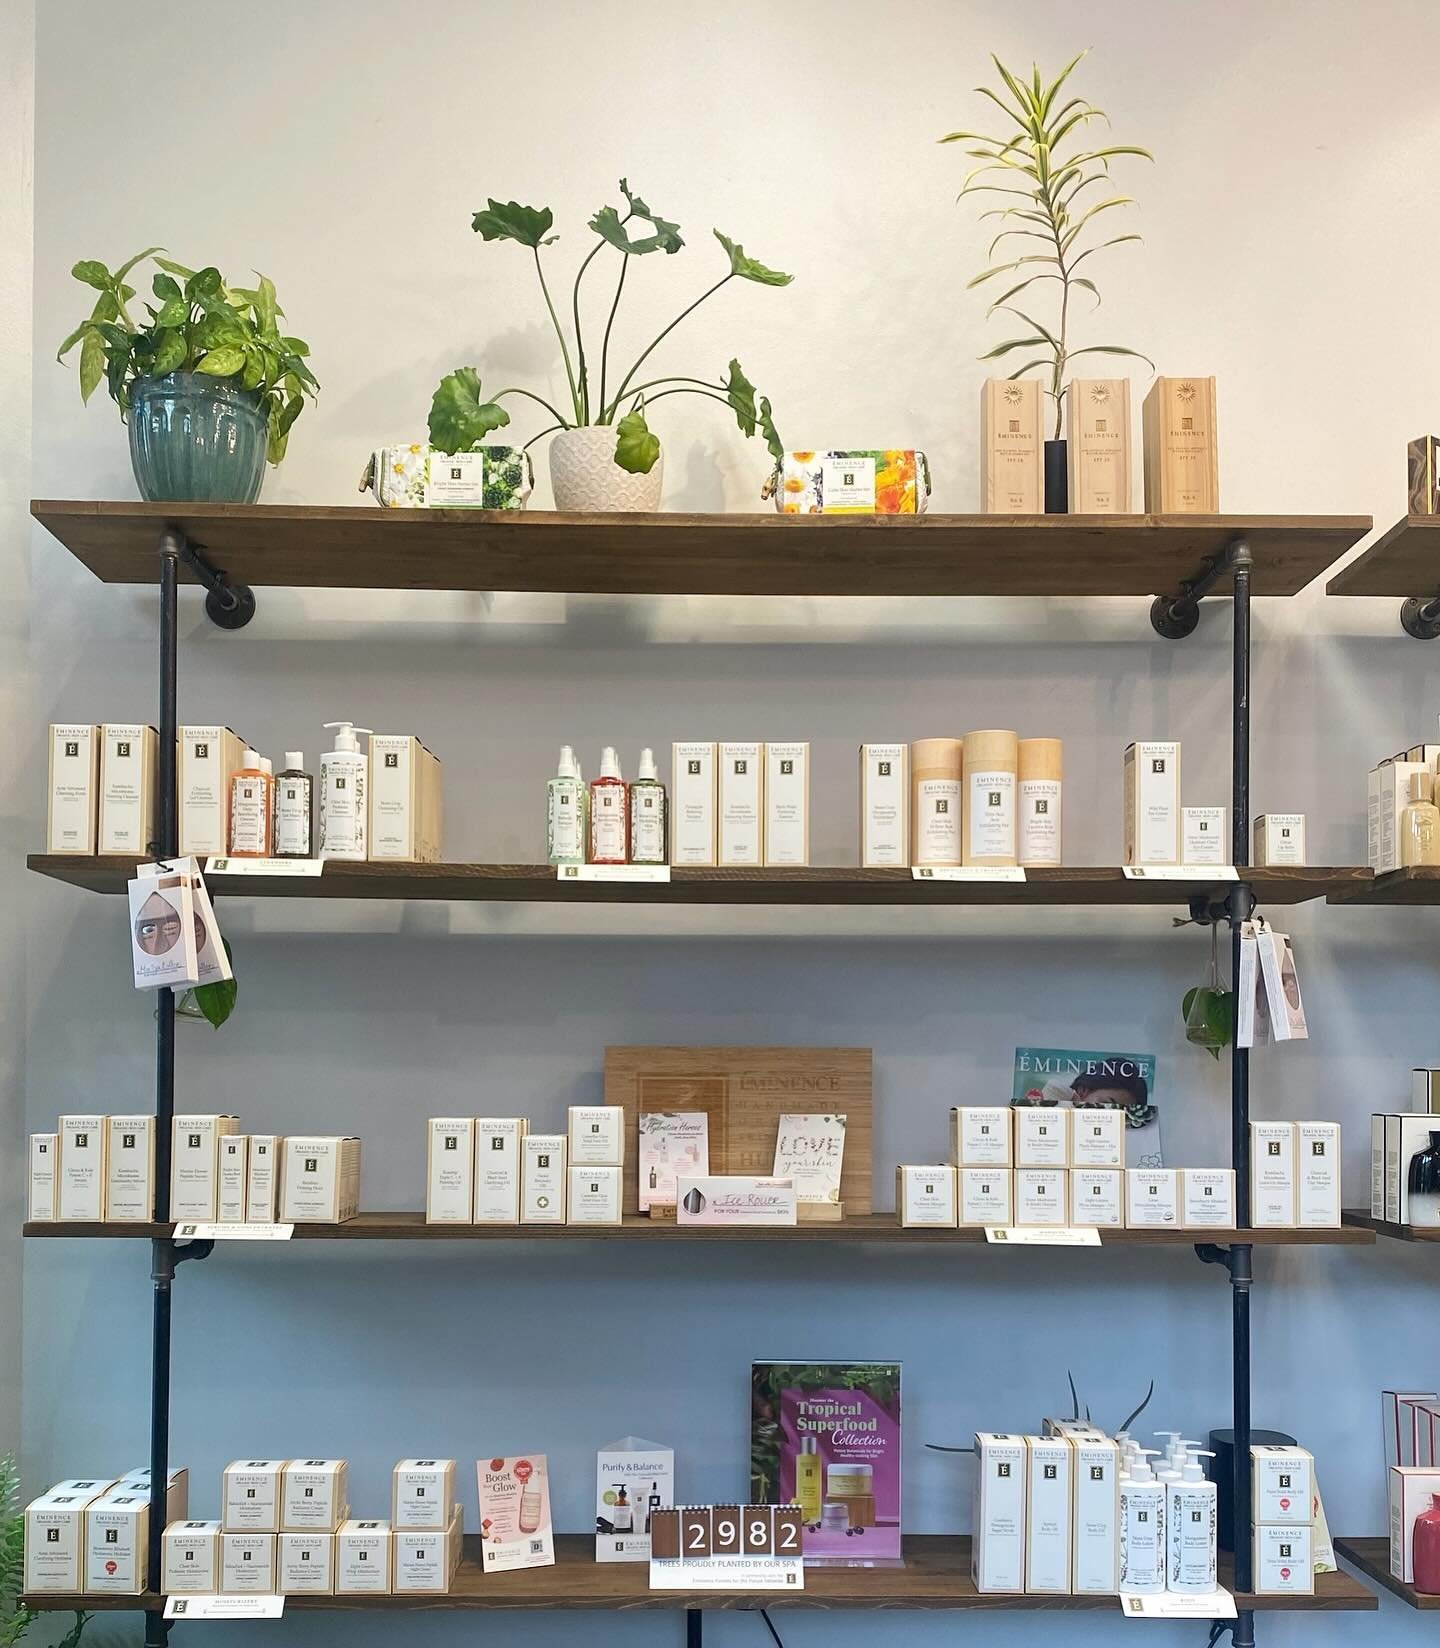 Eminence restocked! 
Ready to refresh your skincare routine? Come see us!💚

📱 Call + 1 (206) 485-7324 to book your appointment. 
📍 1222 E Madison St. Suite E, Seattle, WA 98122 
💻 www.sugarandshearsseattle.com [ Link in bio ]